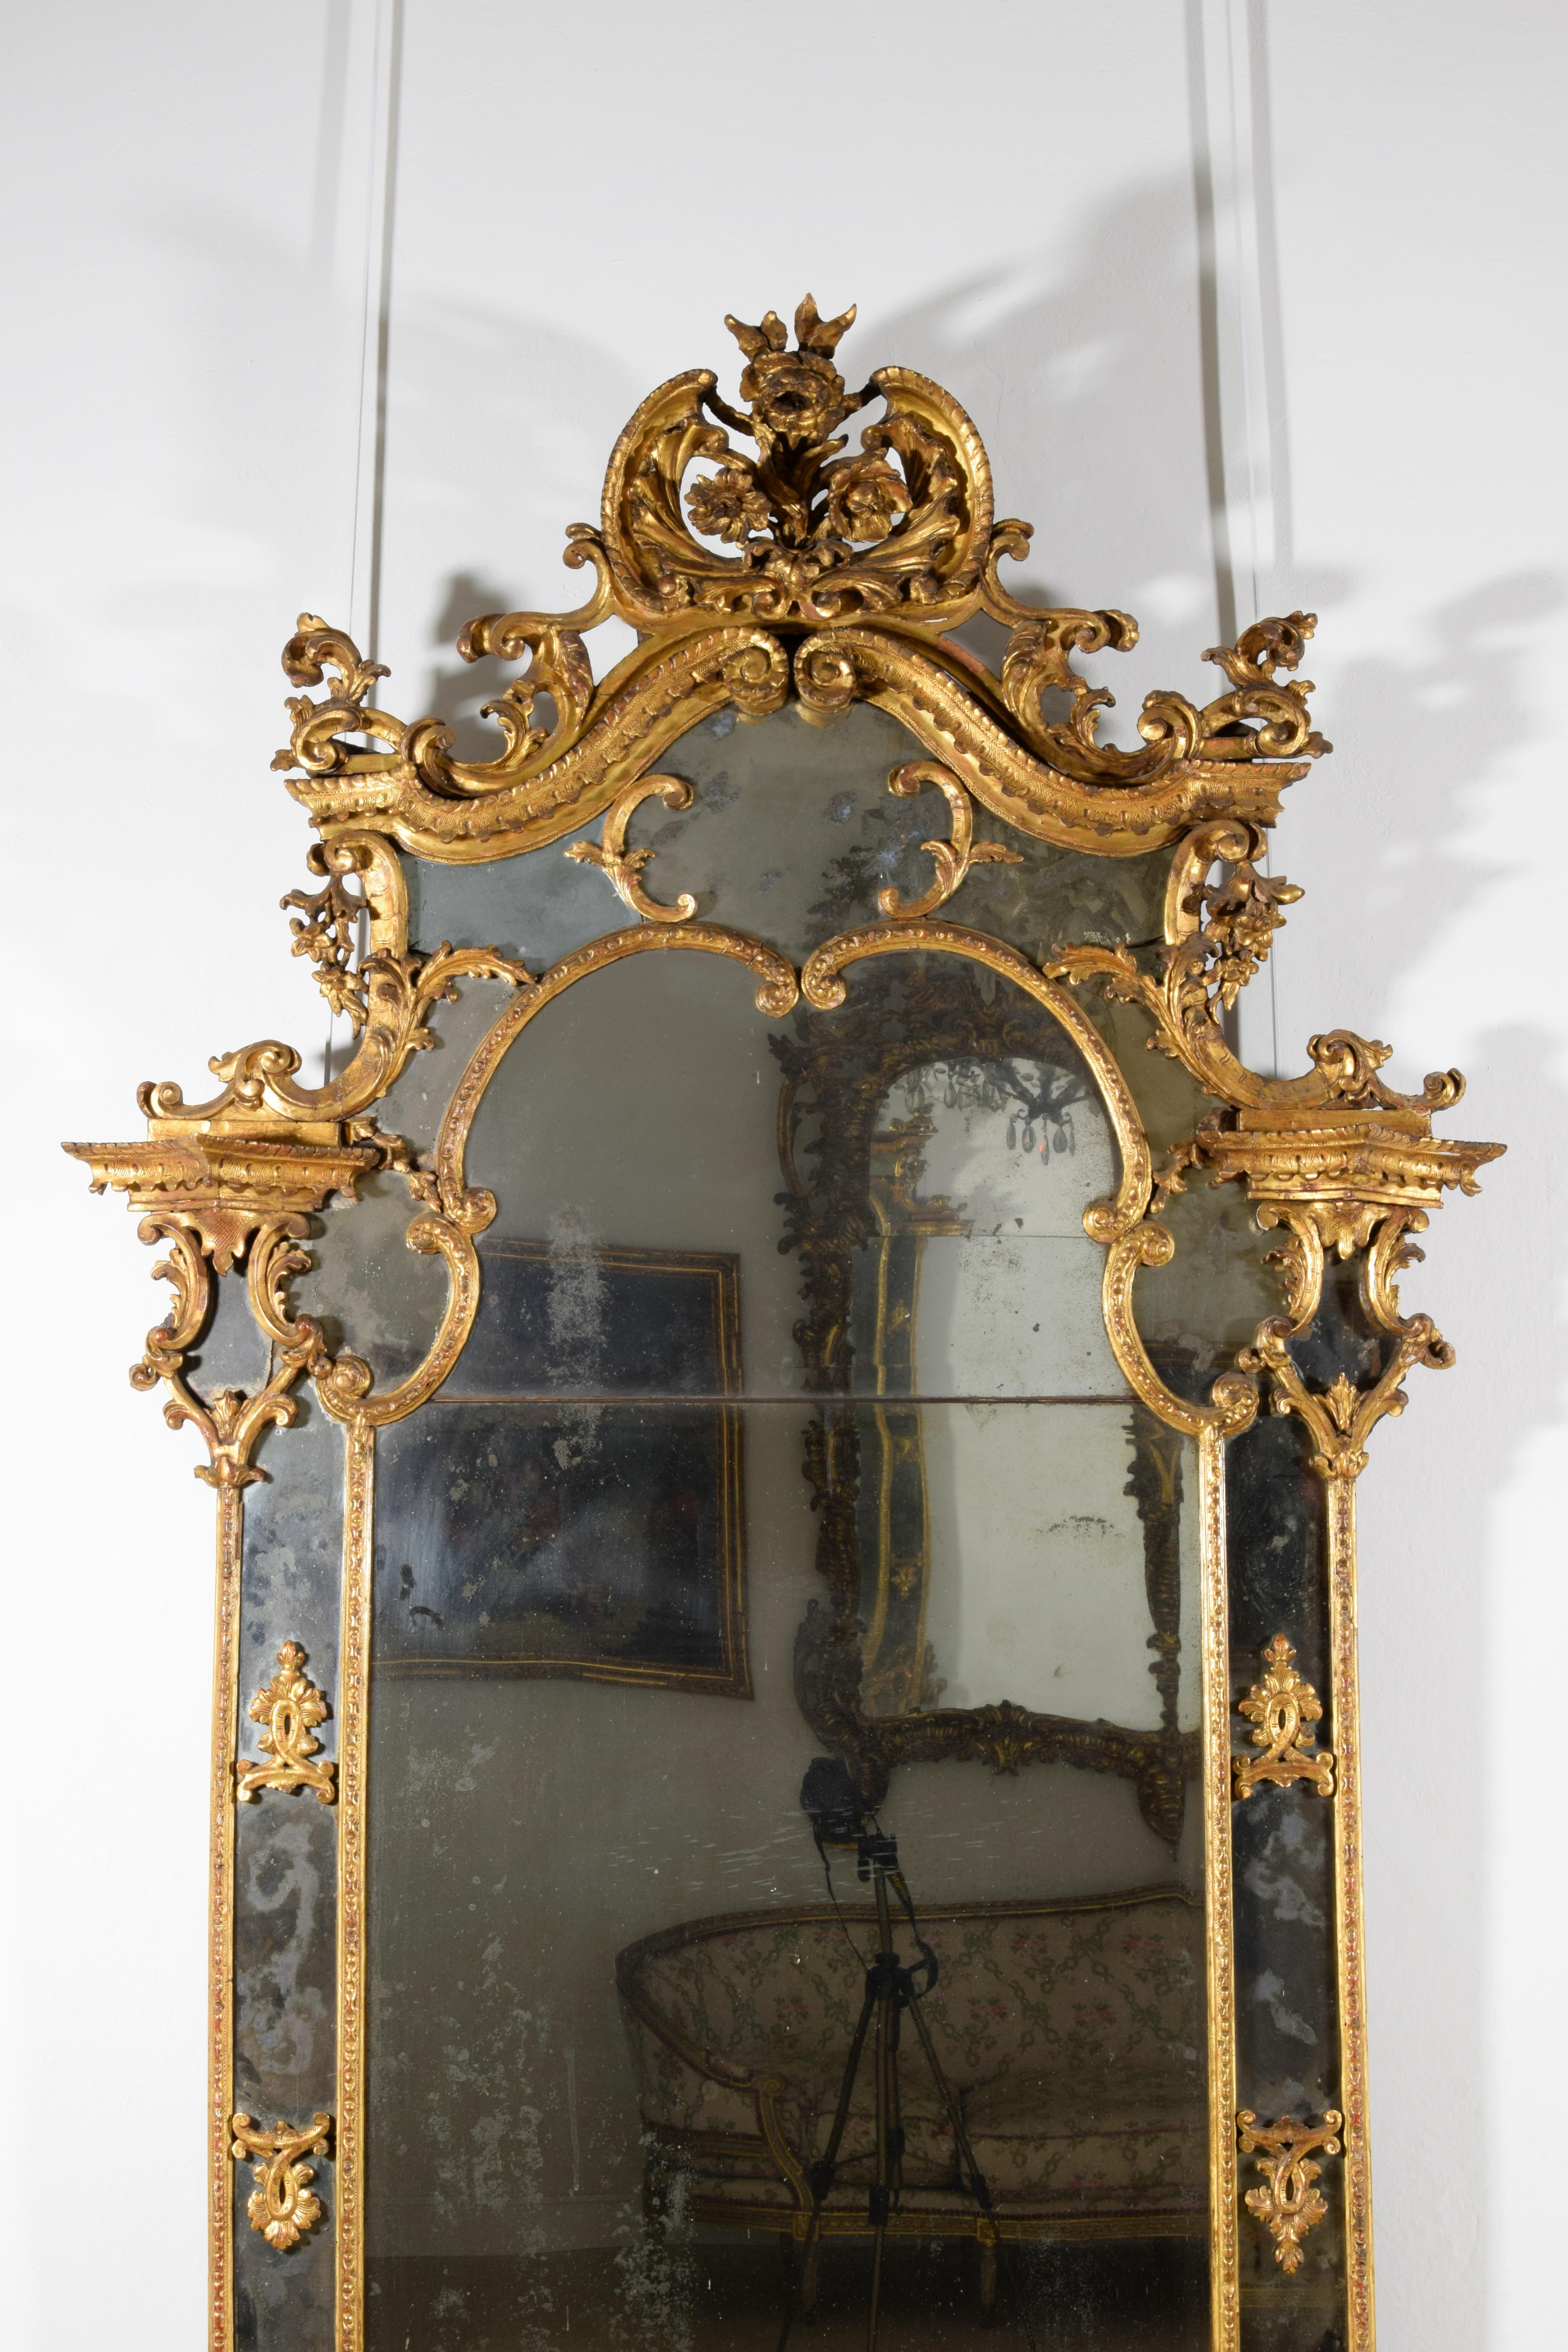 the first mirror ever made